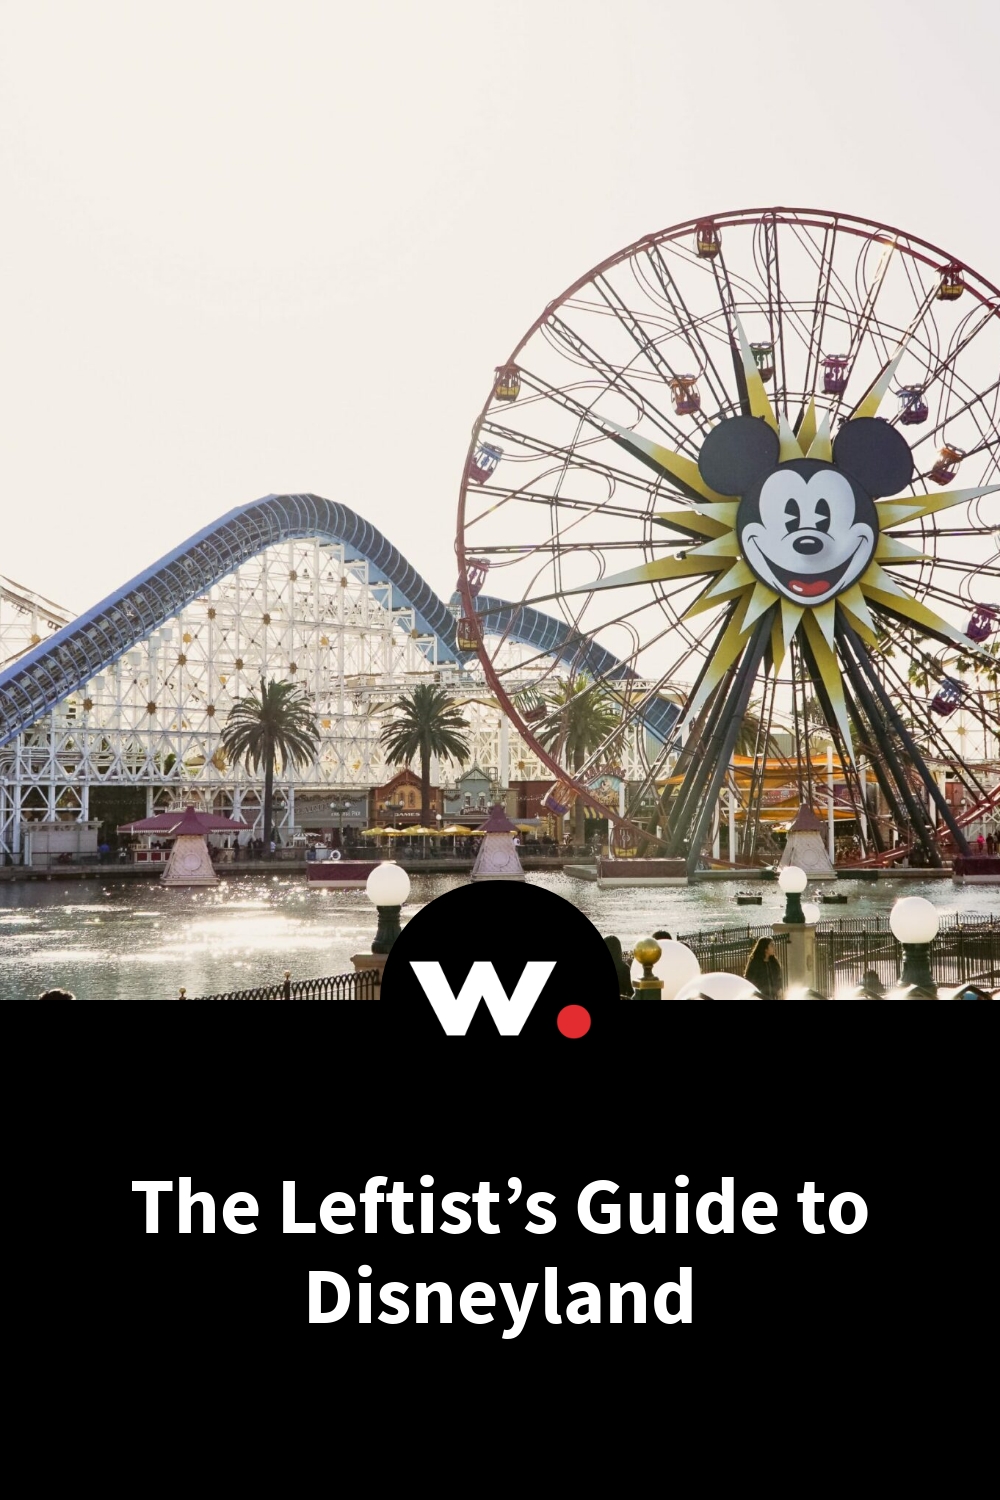 The Leftist’s Guide to Disneyland